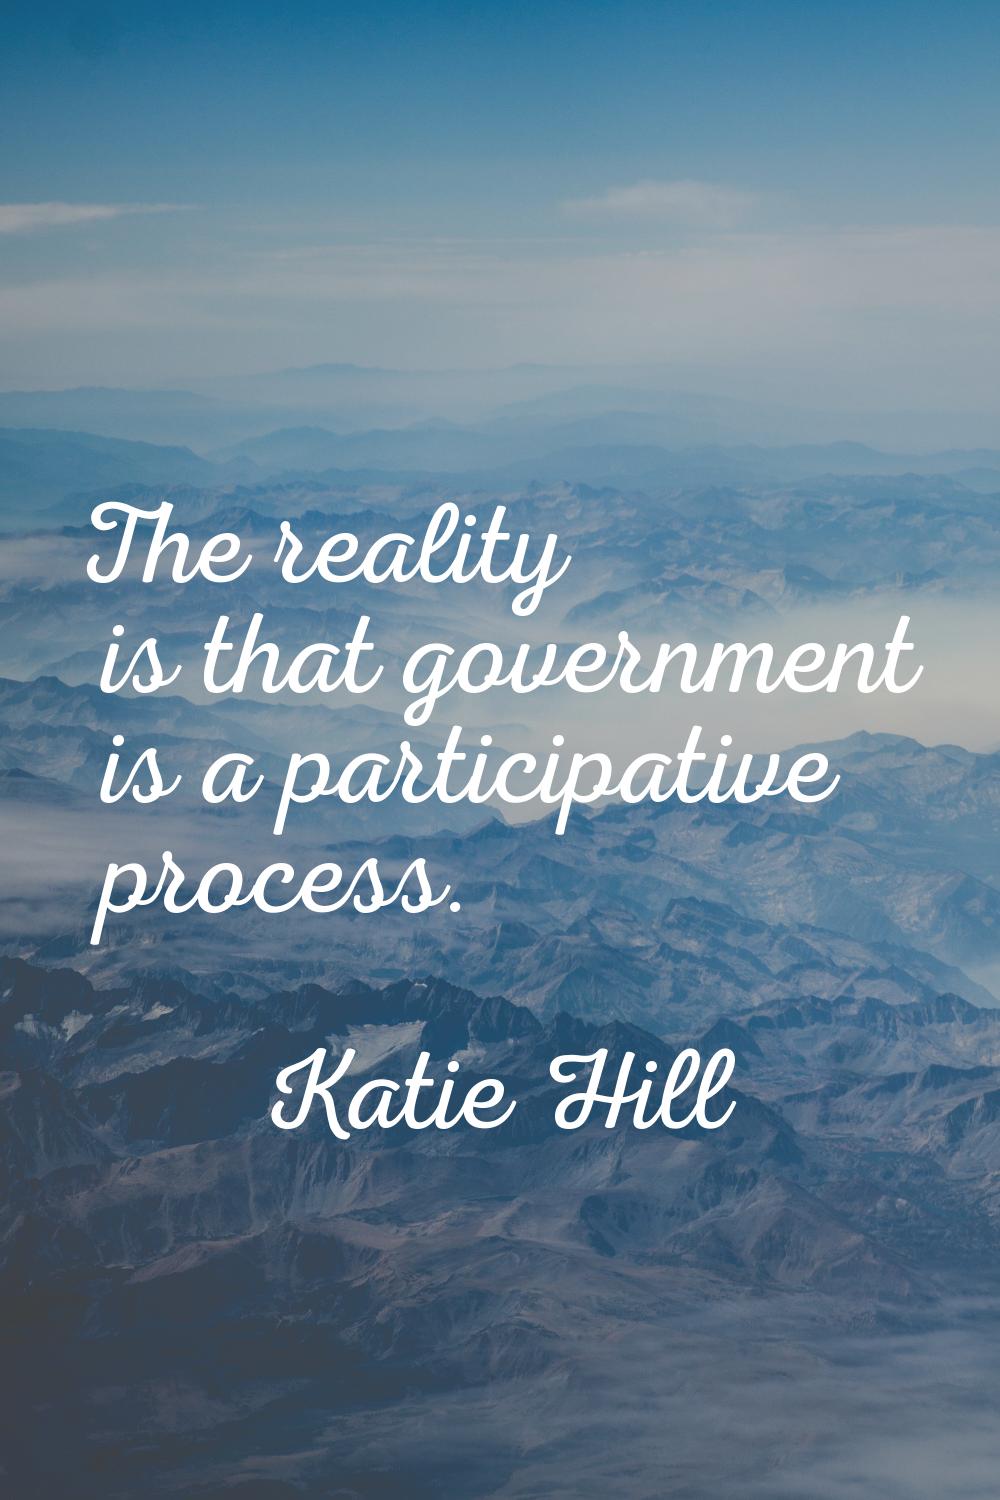 The reality is that government is a participative process.